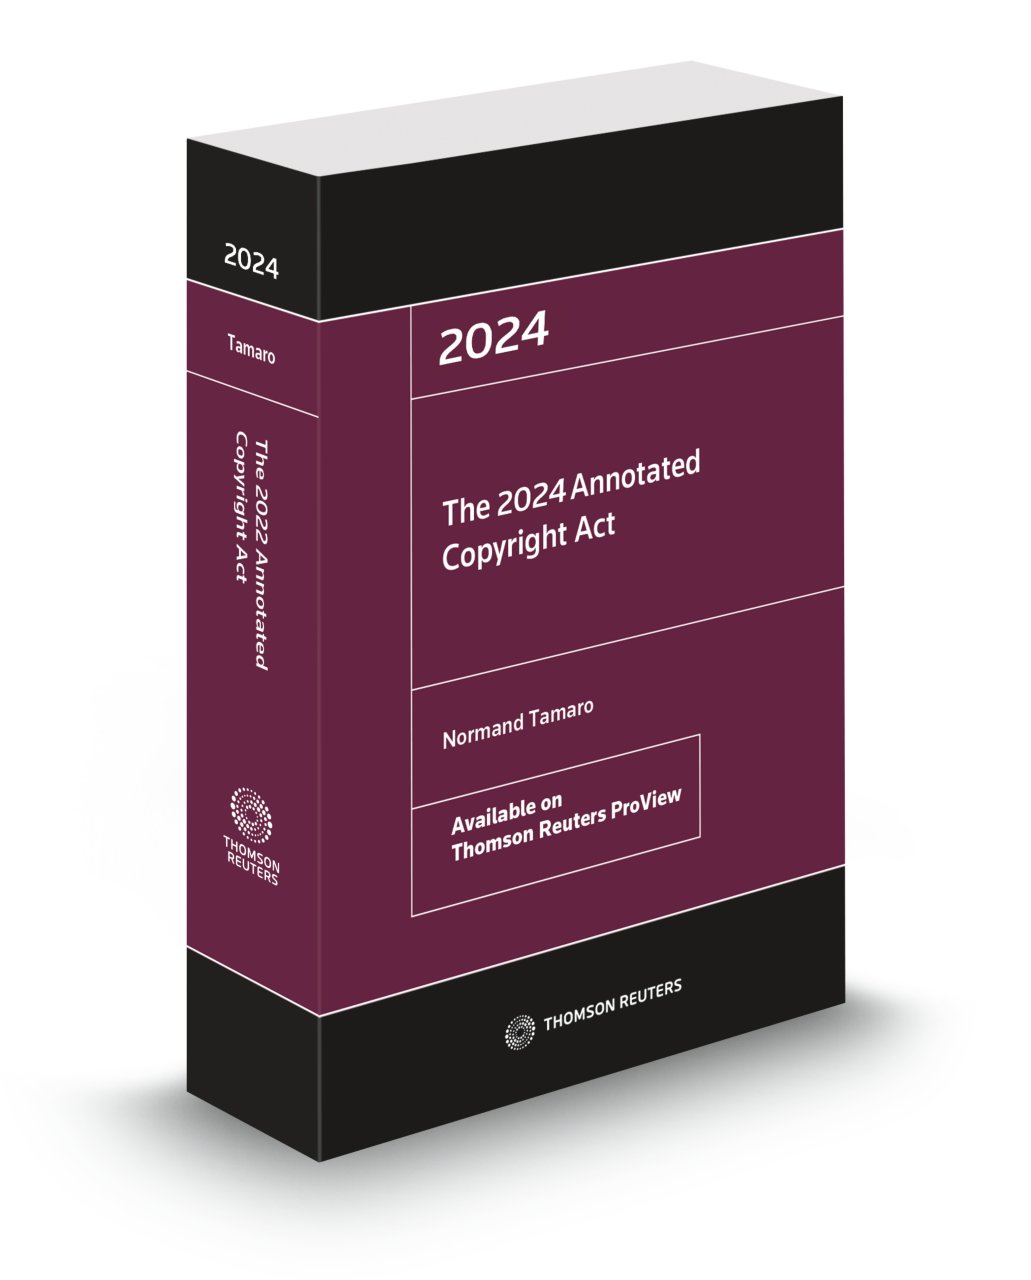 image of The 2024 Annotated Copyright Act